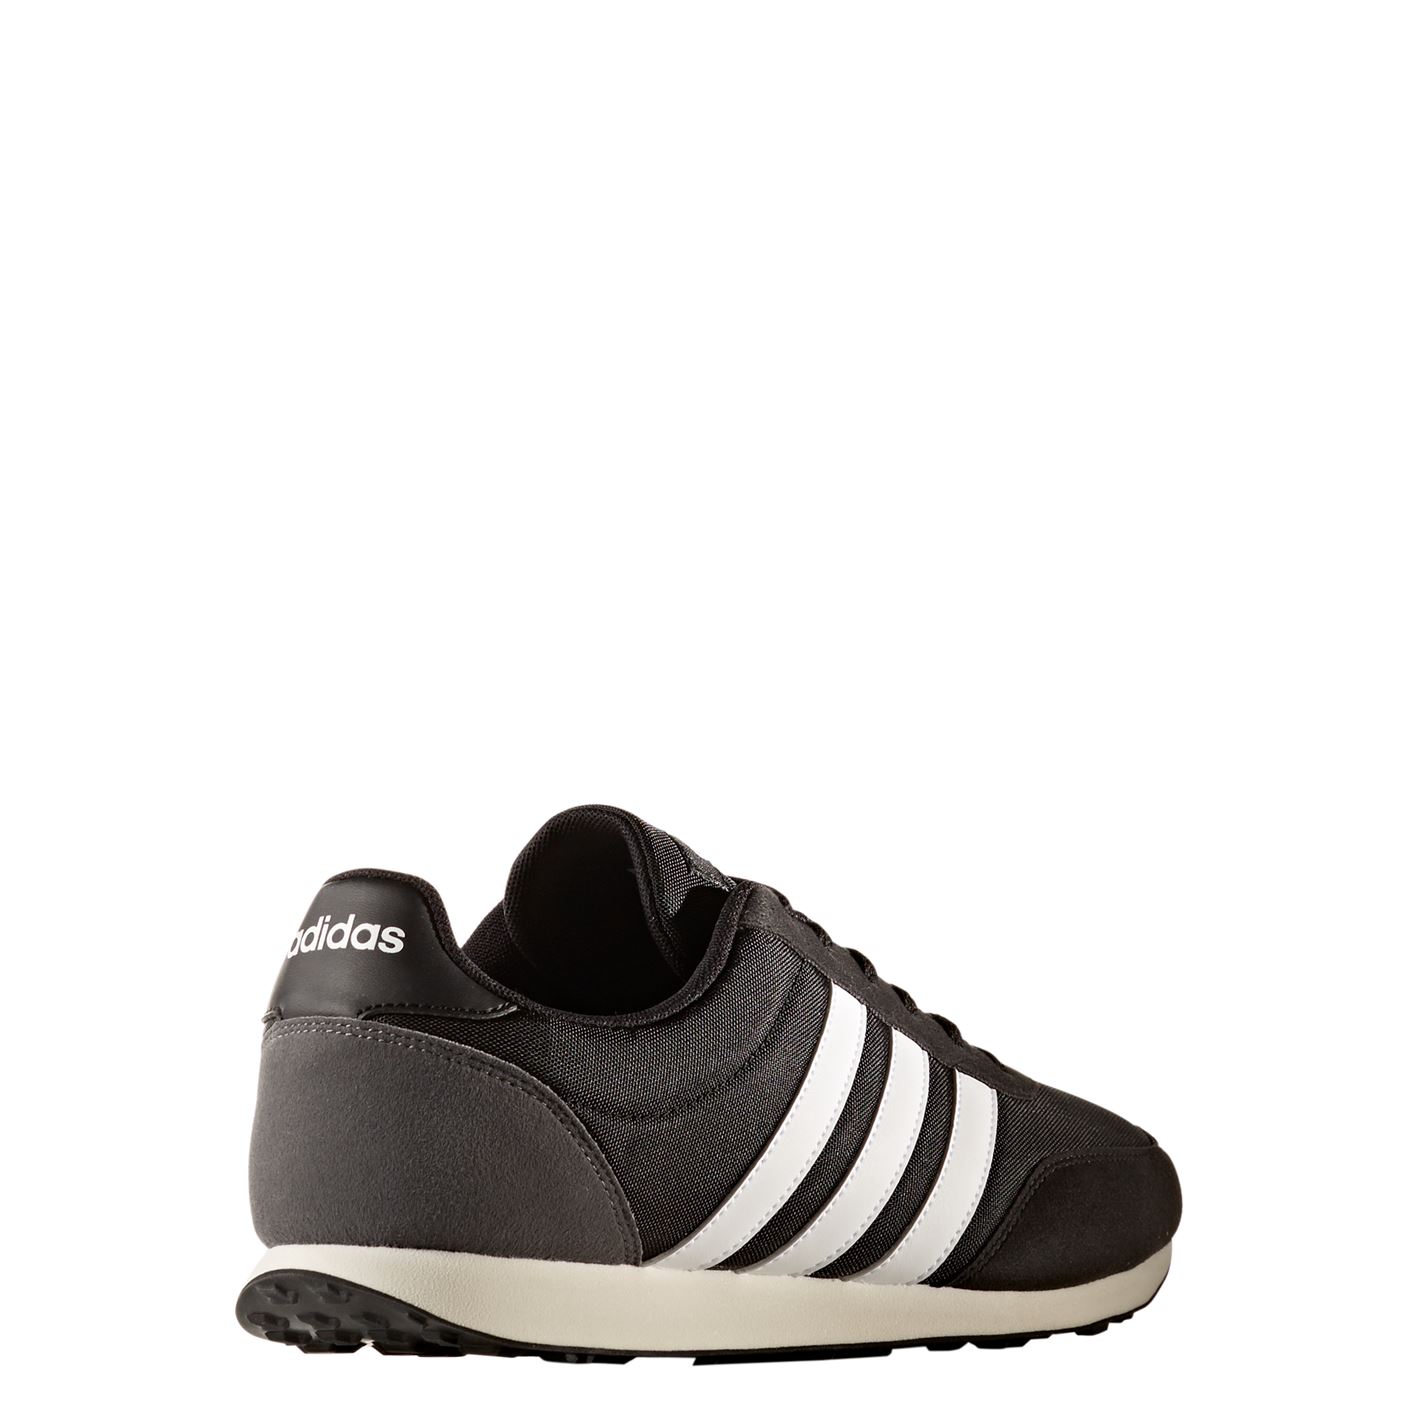 adidas V Racer 2.0 Sneakers Mens Gents Low Laces Fastened Comfortable ...